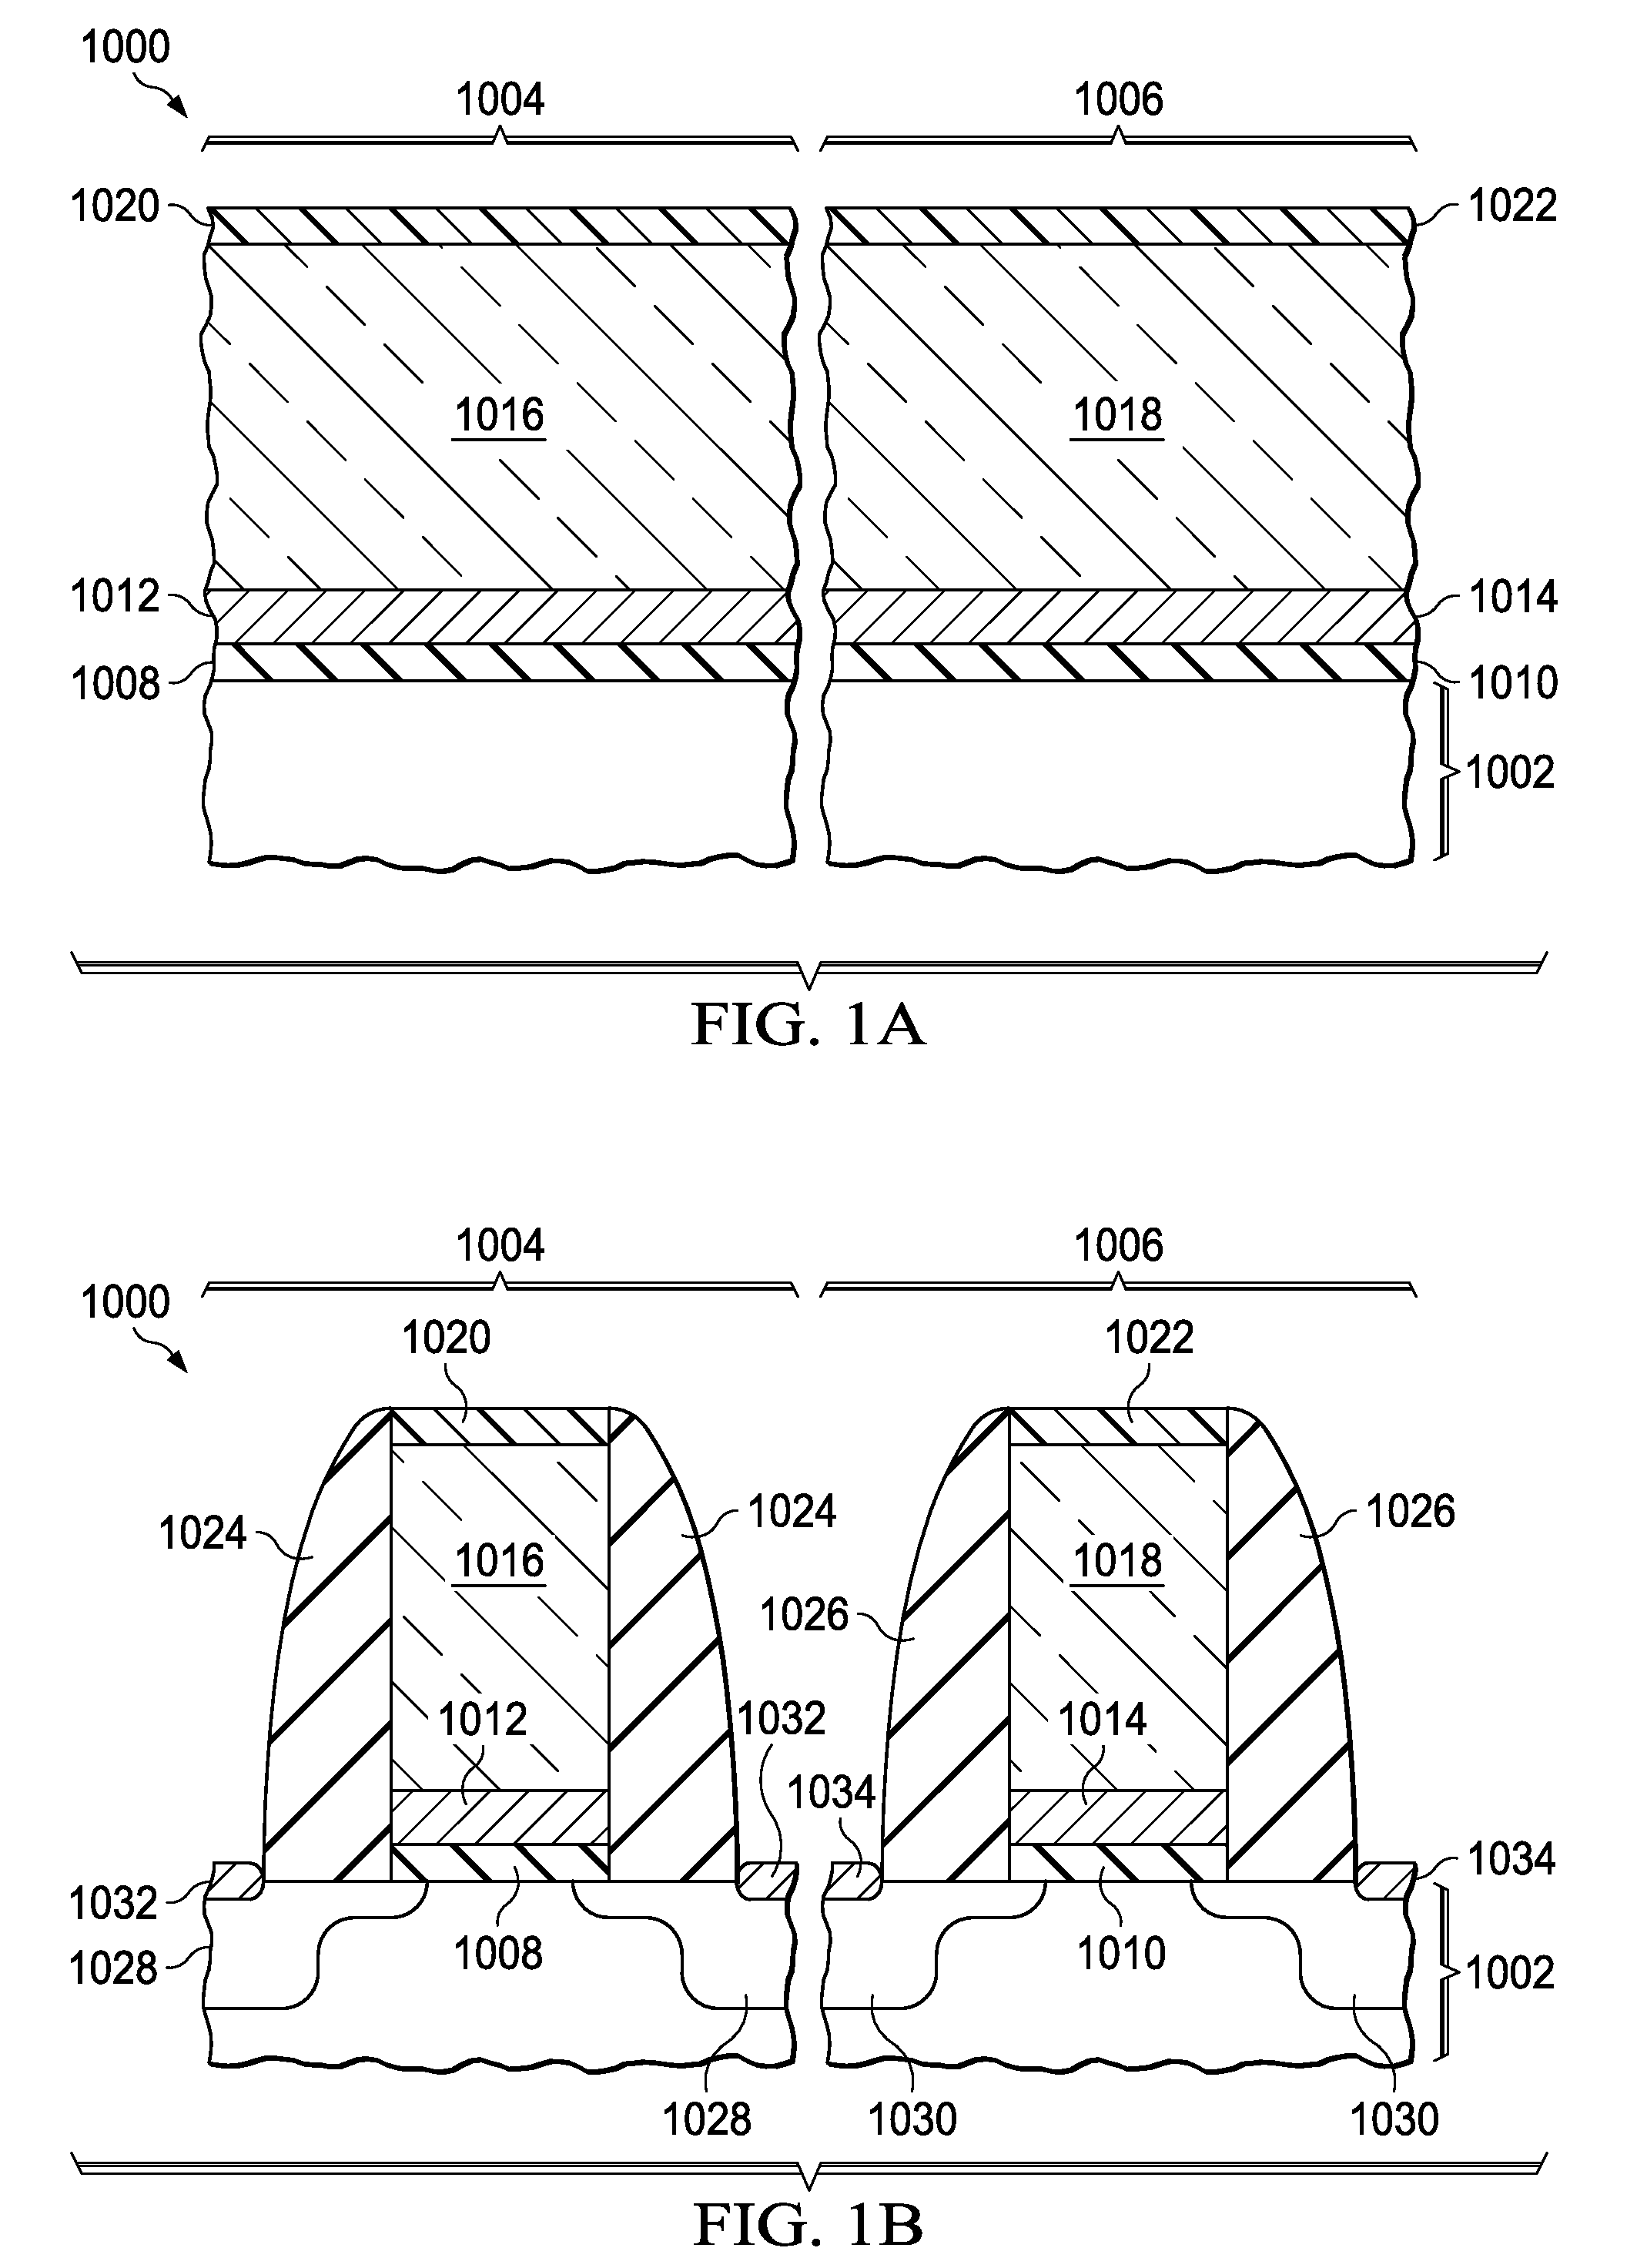 Structure and method for metal gate stack oxygen concentration control using an oxygen diffusion barrier layer and a sacrificial oxygen gettering layer